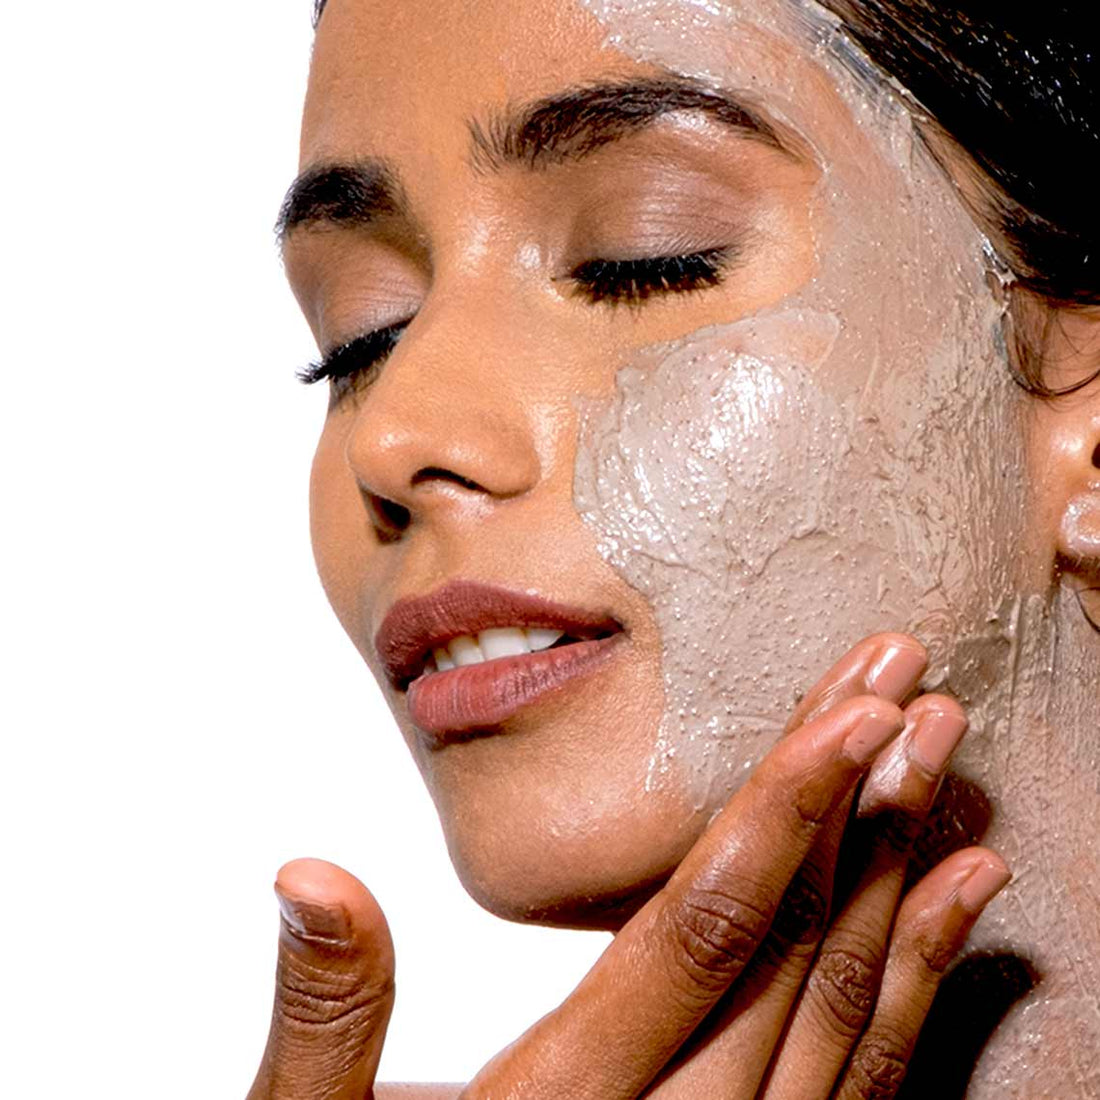 How To Use A Face Scrub? - A Complete Guide